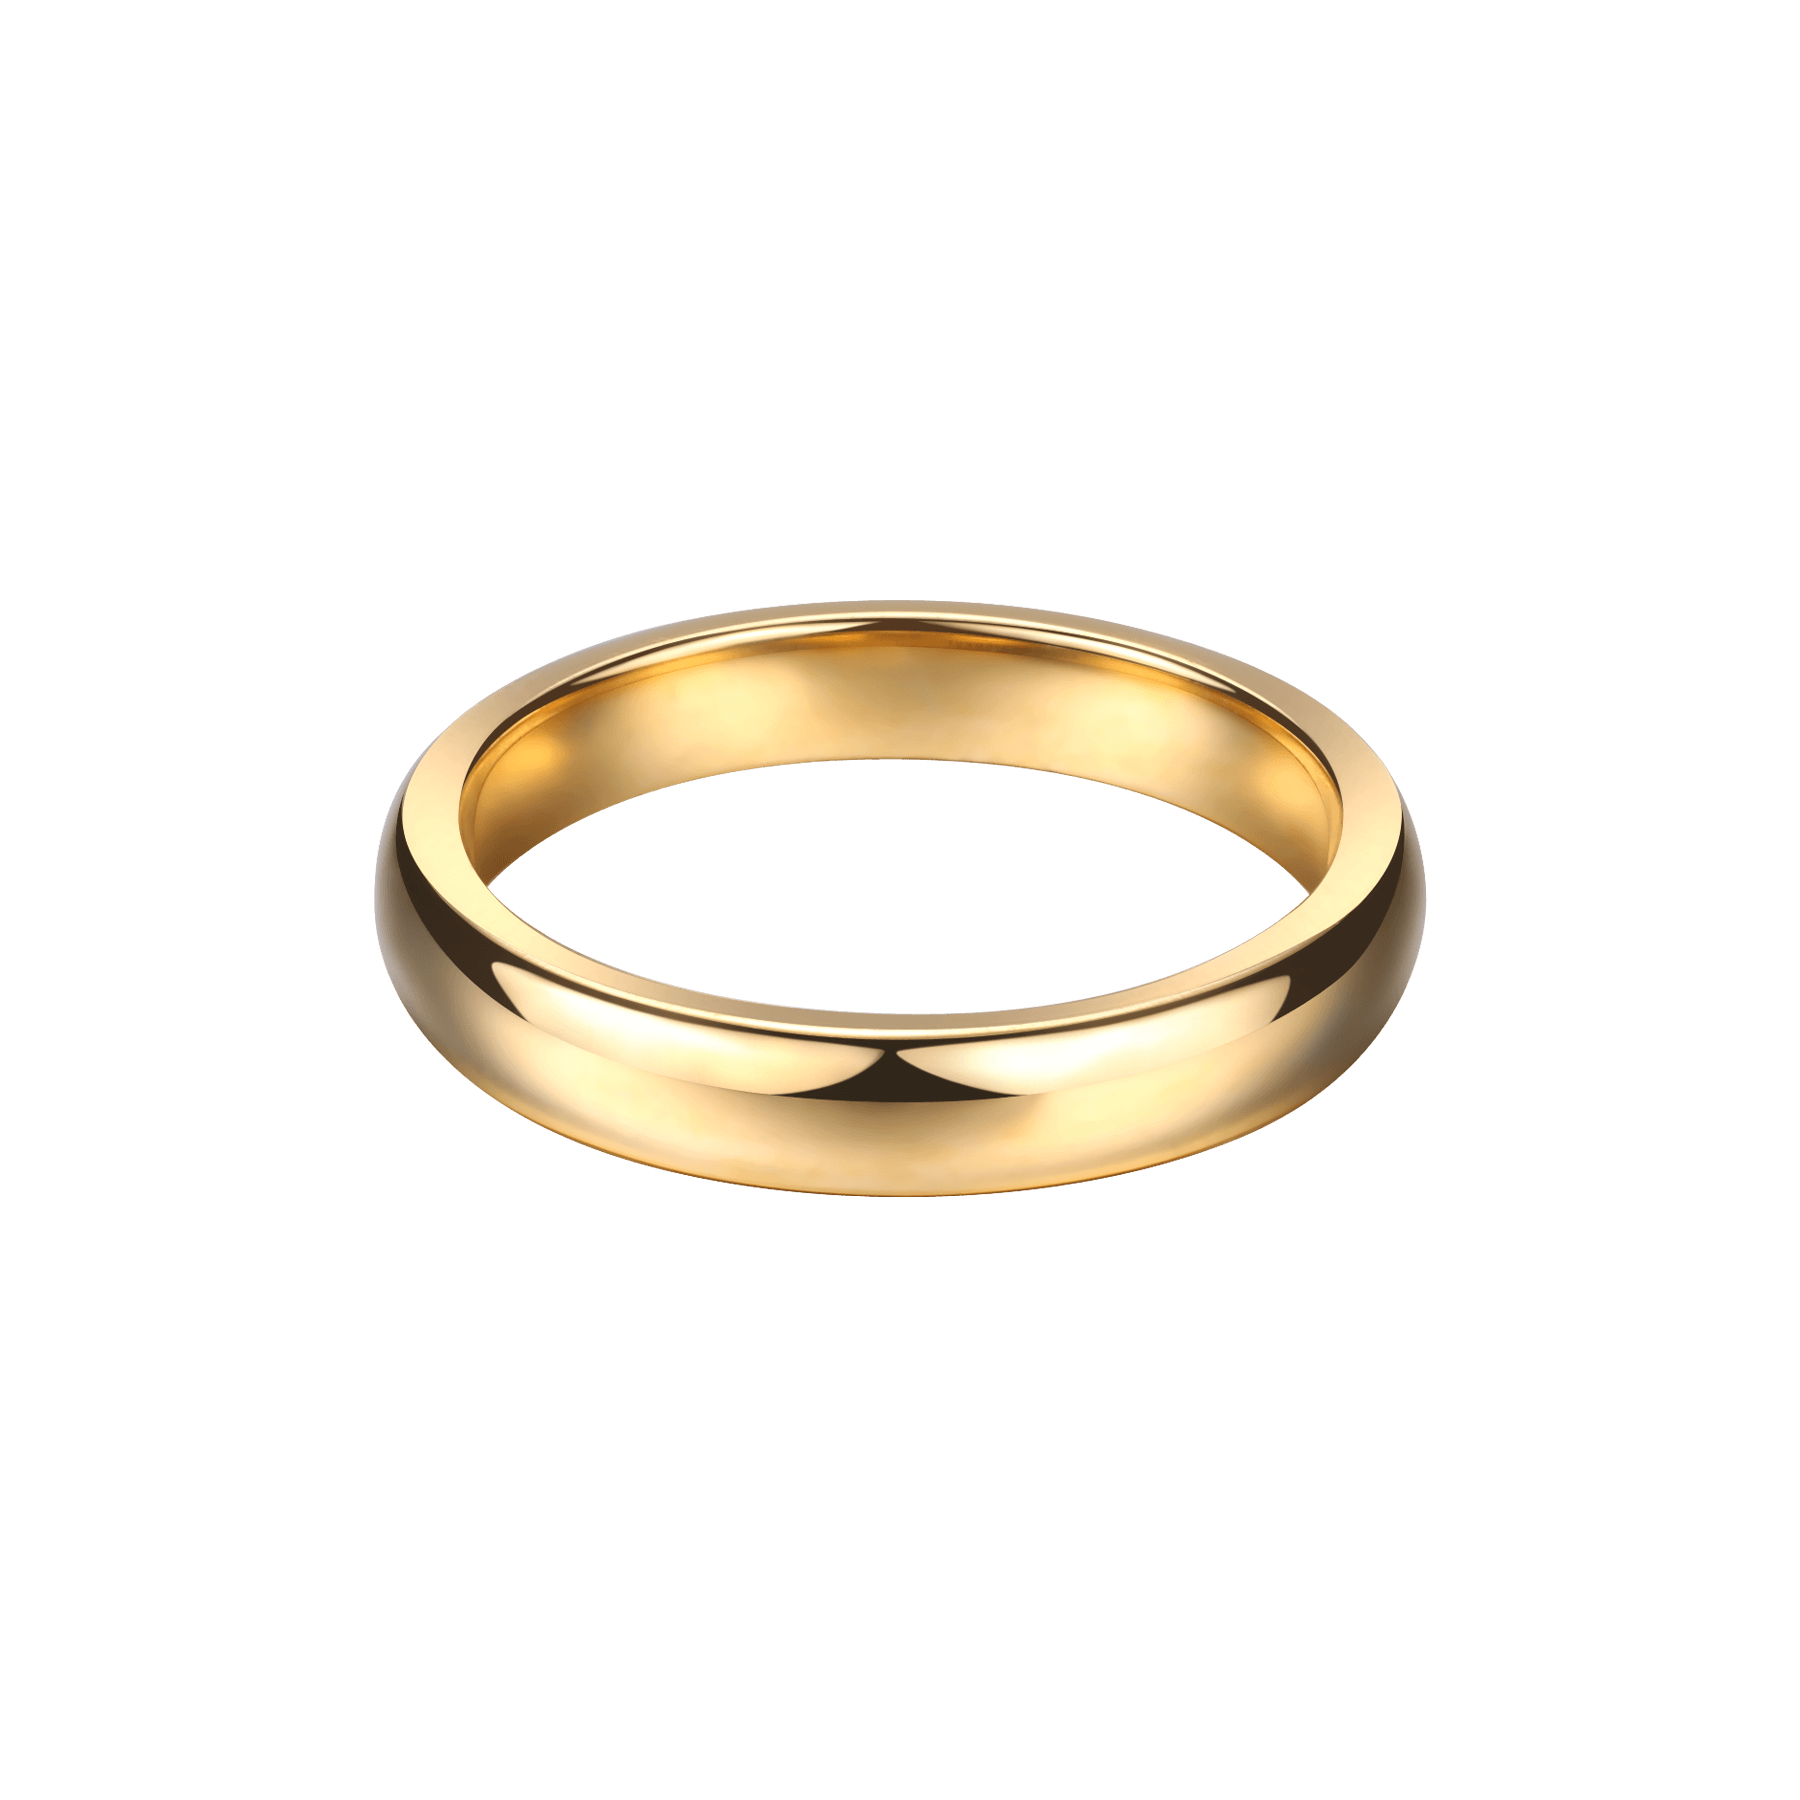 FAVPNG_wedding-ring-jewellery-gold-silver_61qeJXZY-1.png